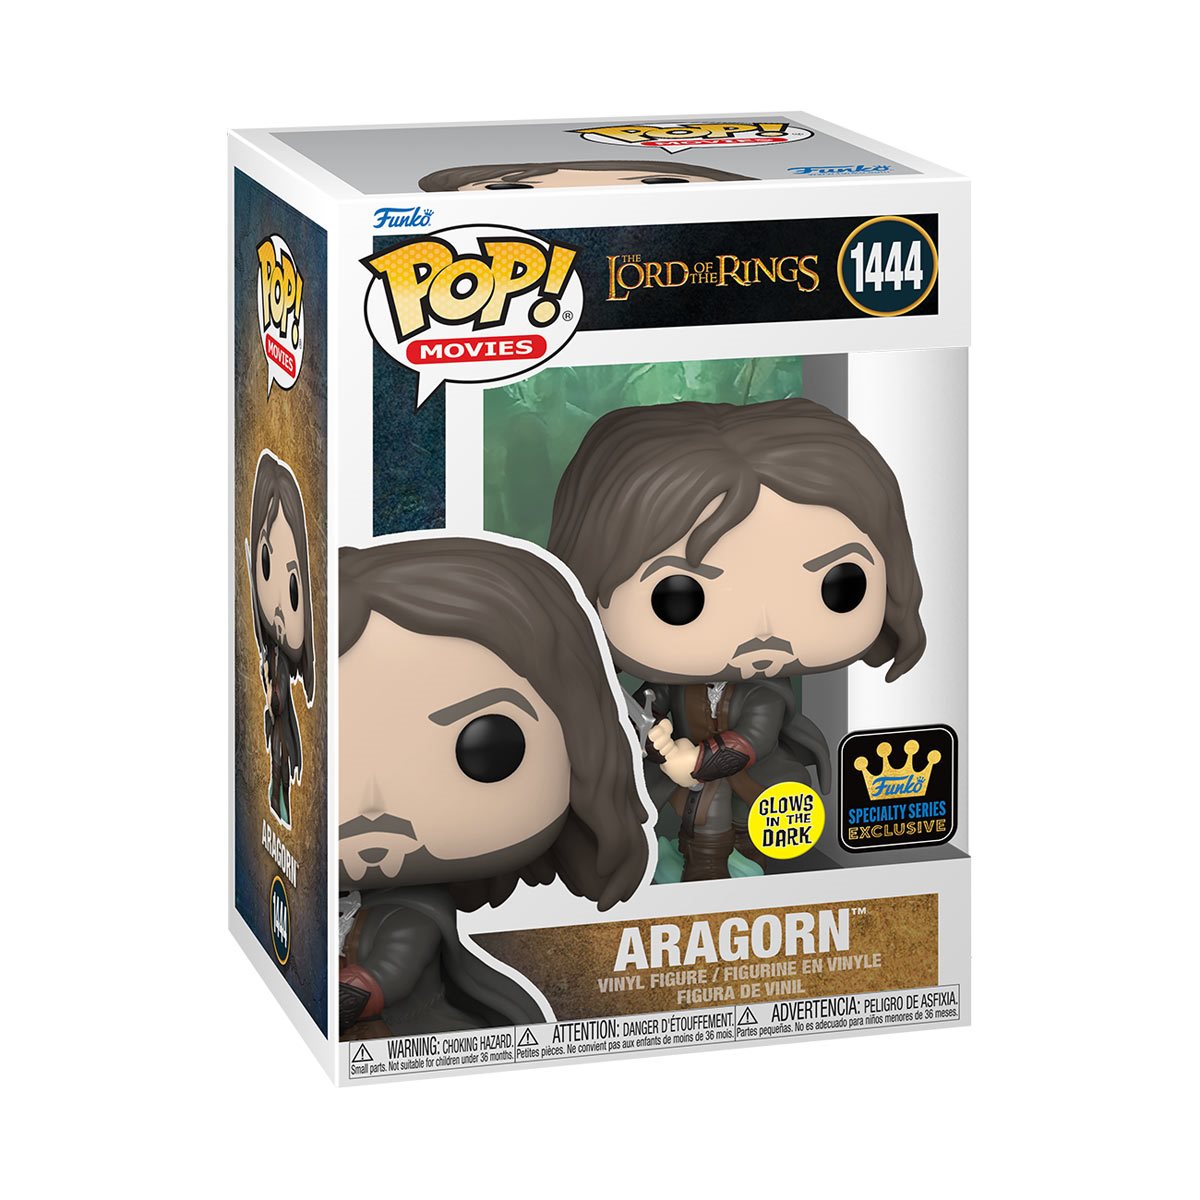 Pop! Movies 1444 The Lord of The Rings: Aragorn (Glow In The Dark) (Specialty Series)